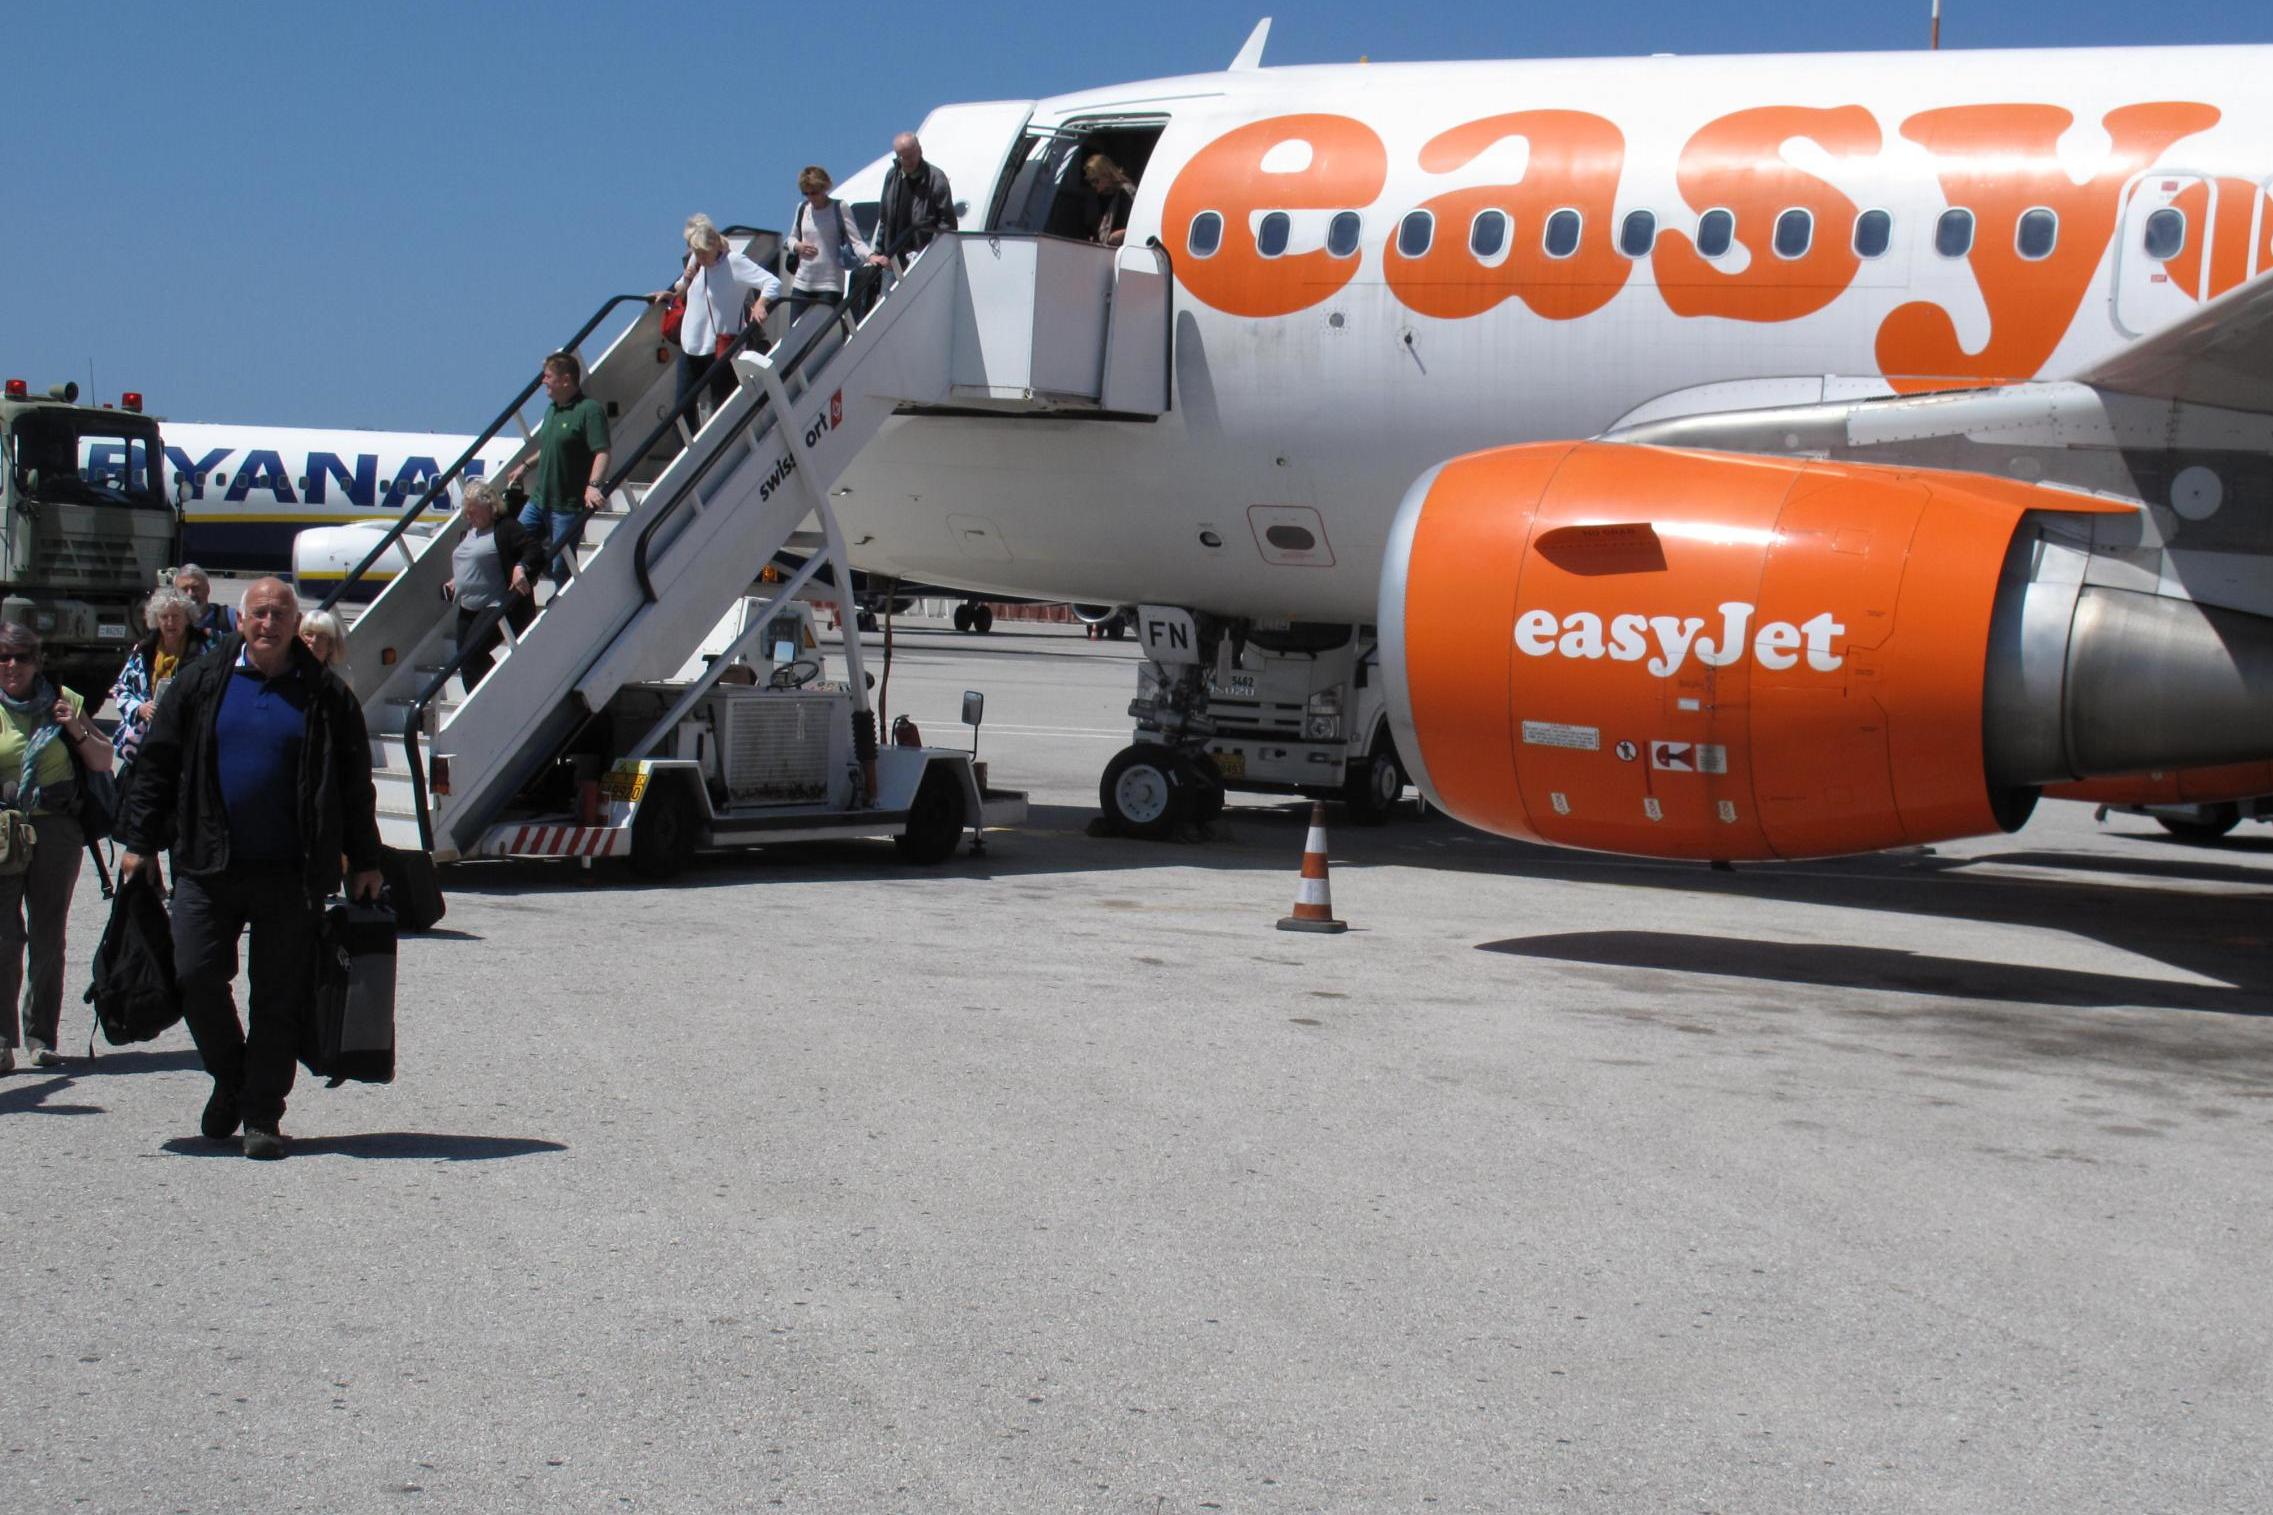 Ground stop: easyJet has cancelled 32 flights, including the only departure from Gatwick to Catania